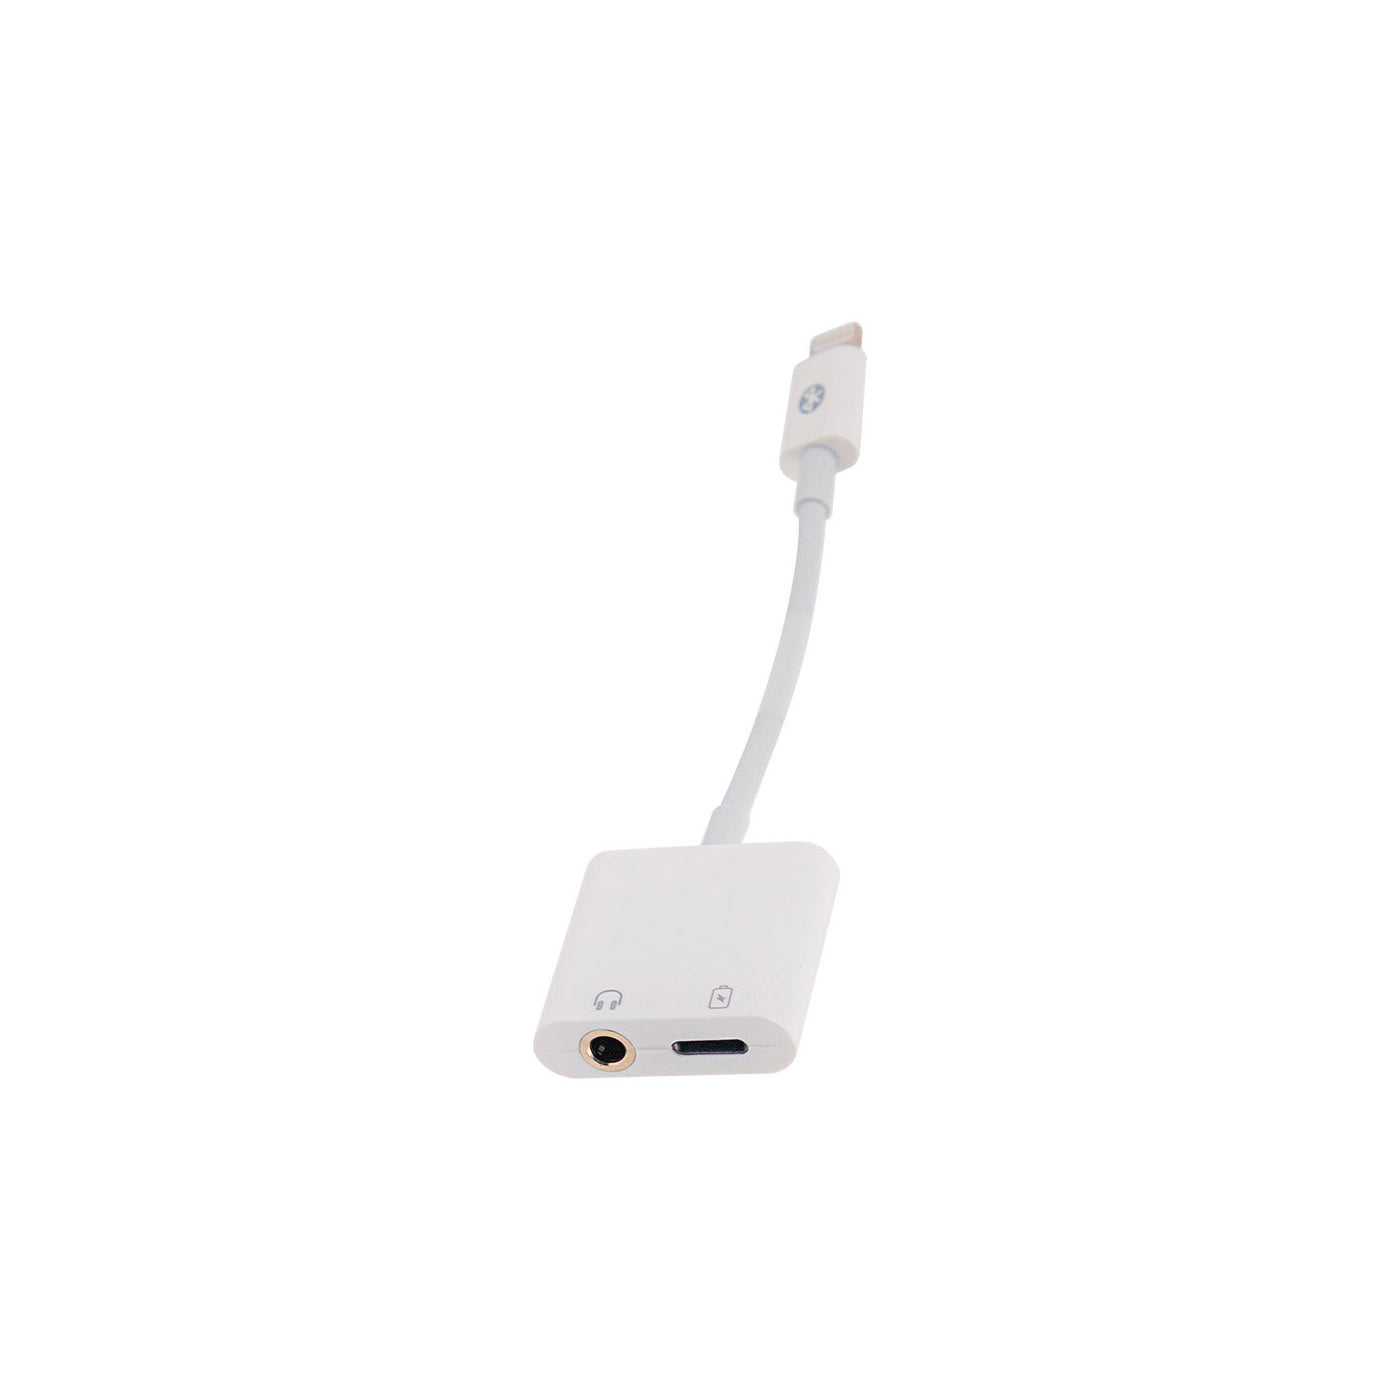 Motto 3.5mm Adapter for iPhone